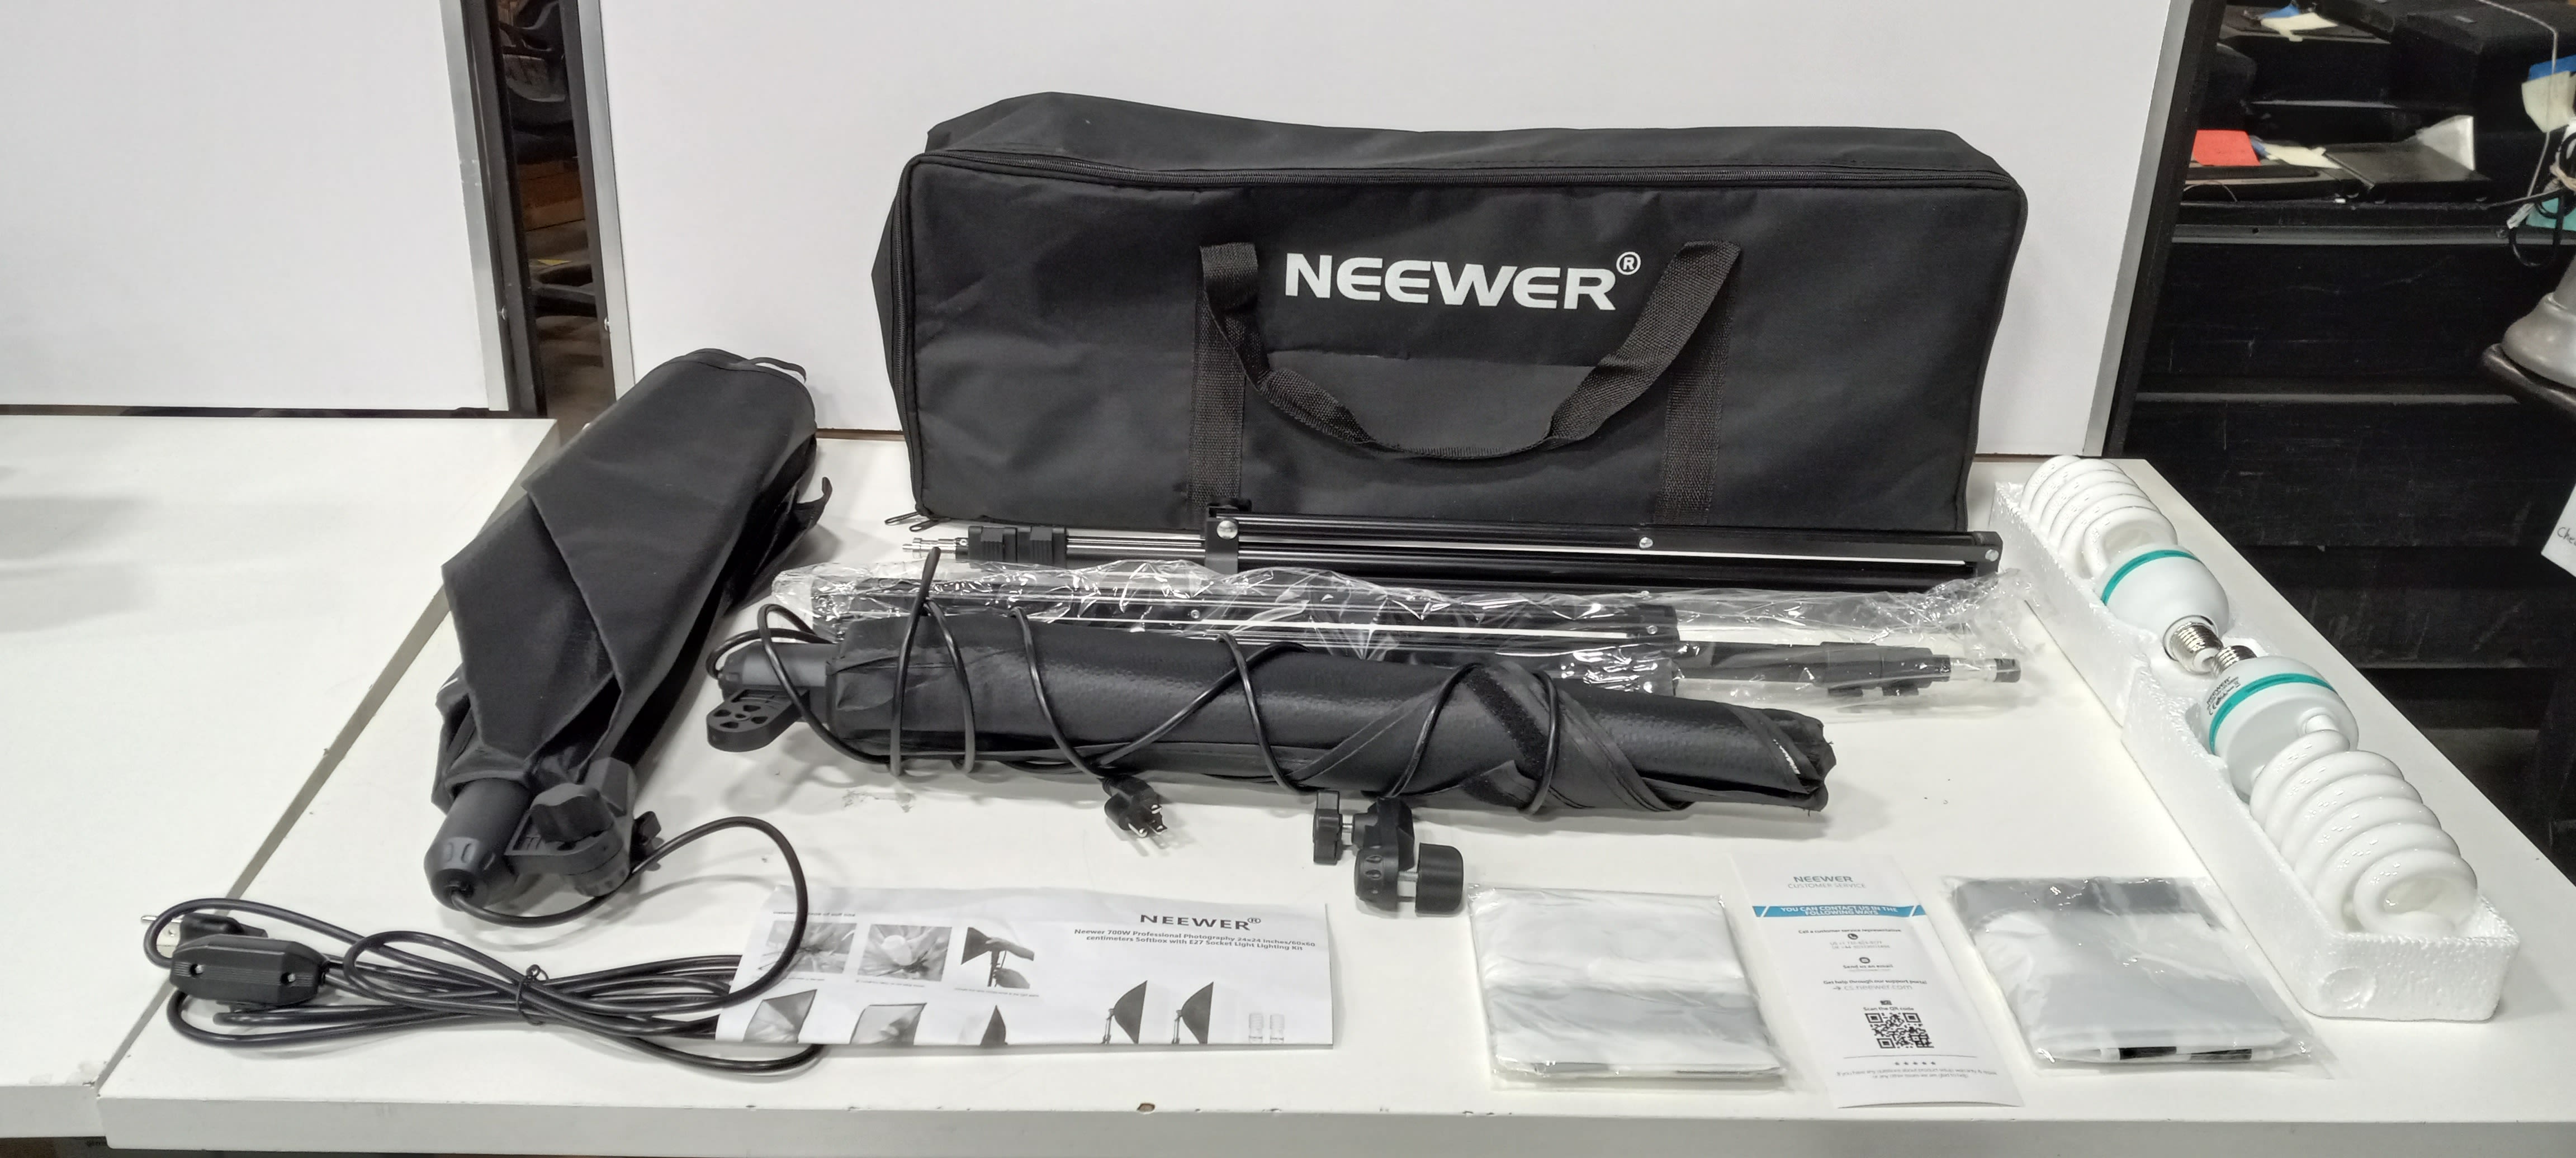 Neewer 700W Professional Photography 24x24 inches/60x60